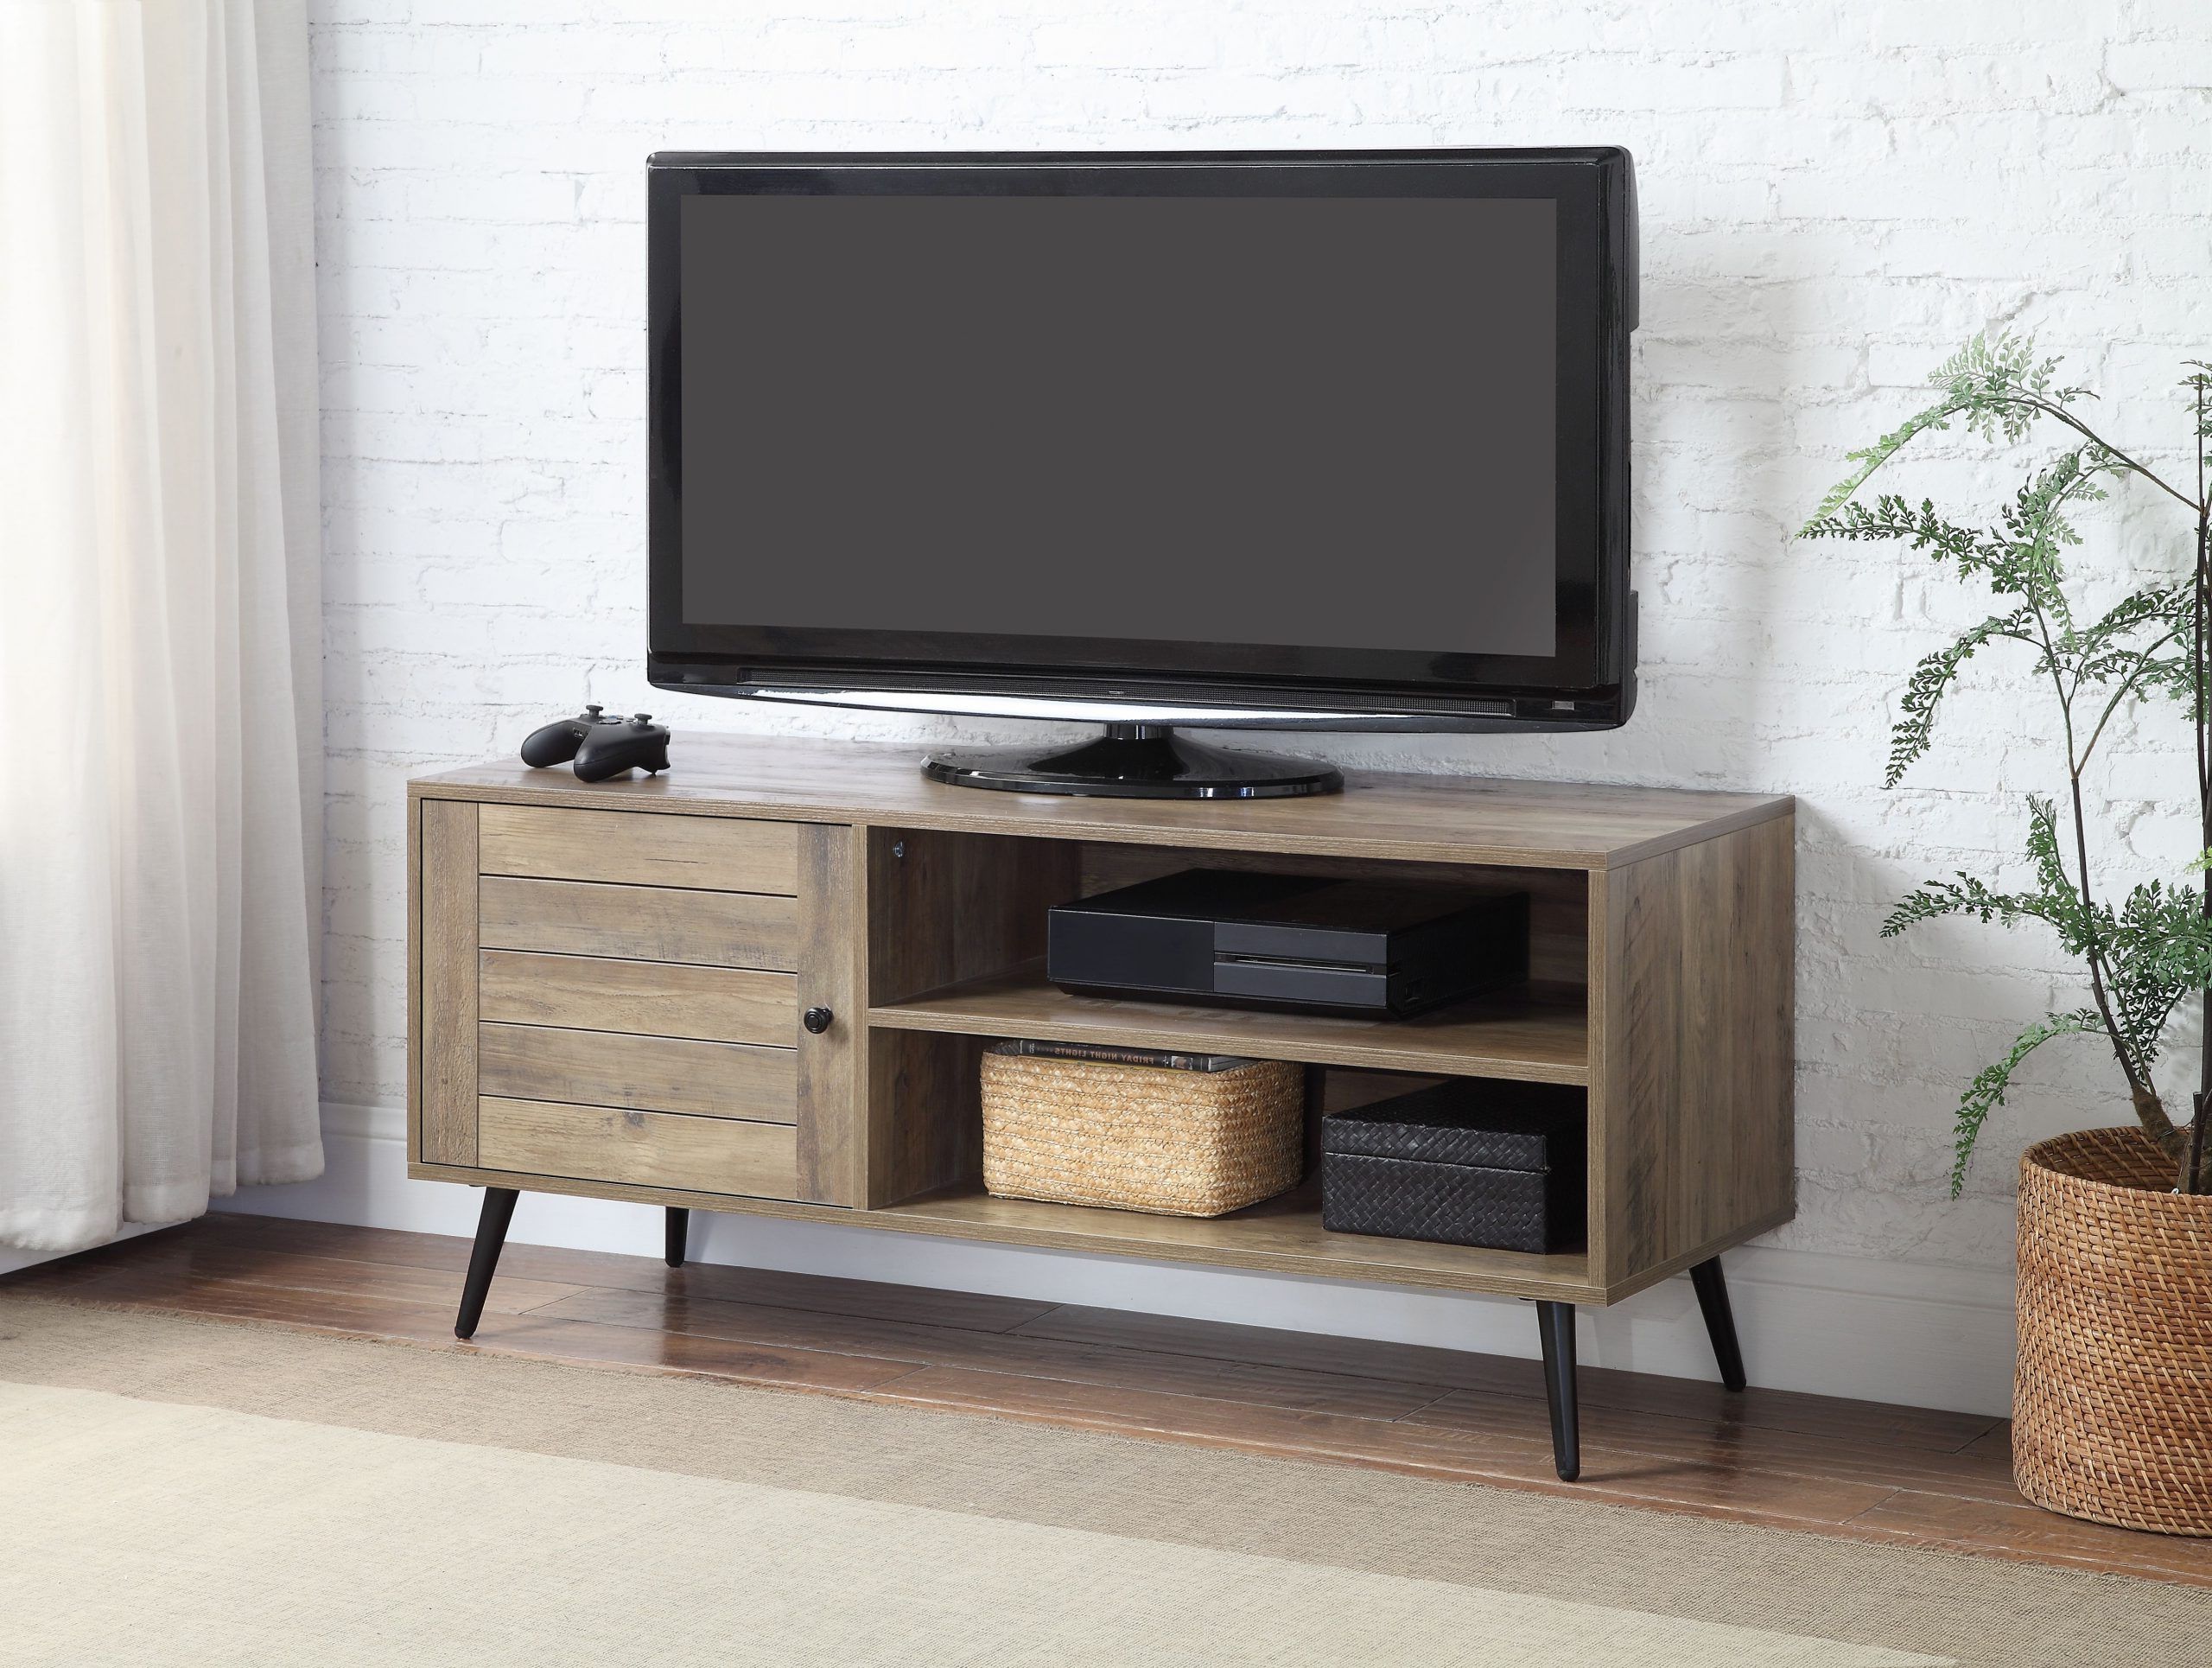 Well Known Acme Baina Tv Stand In Rustic Oak & Black Finish – Acme Furniture Store For Rustic Oak And Black Tv Stands (View 7 of 10)